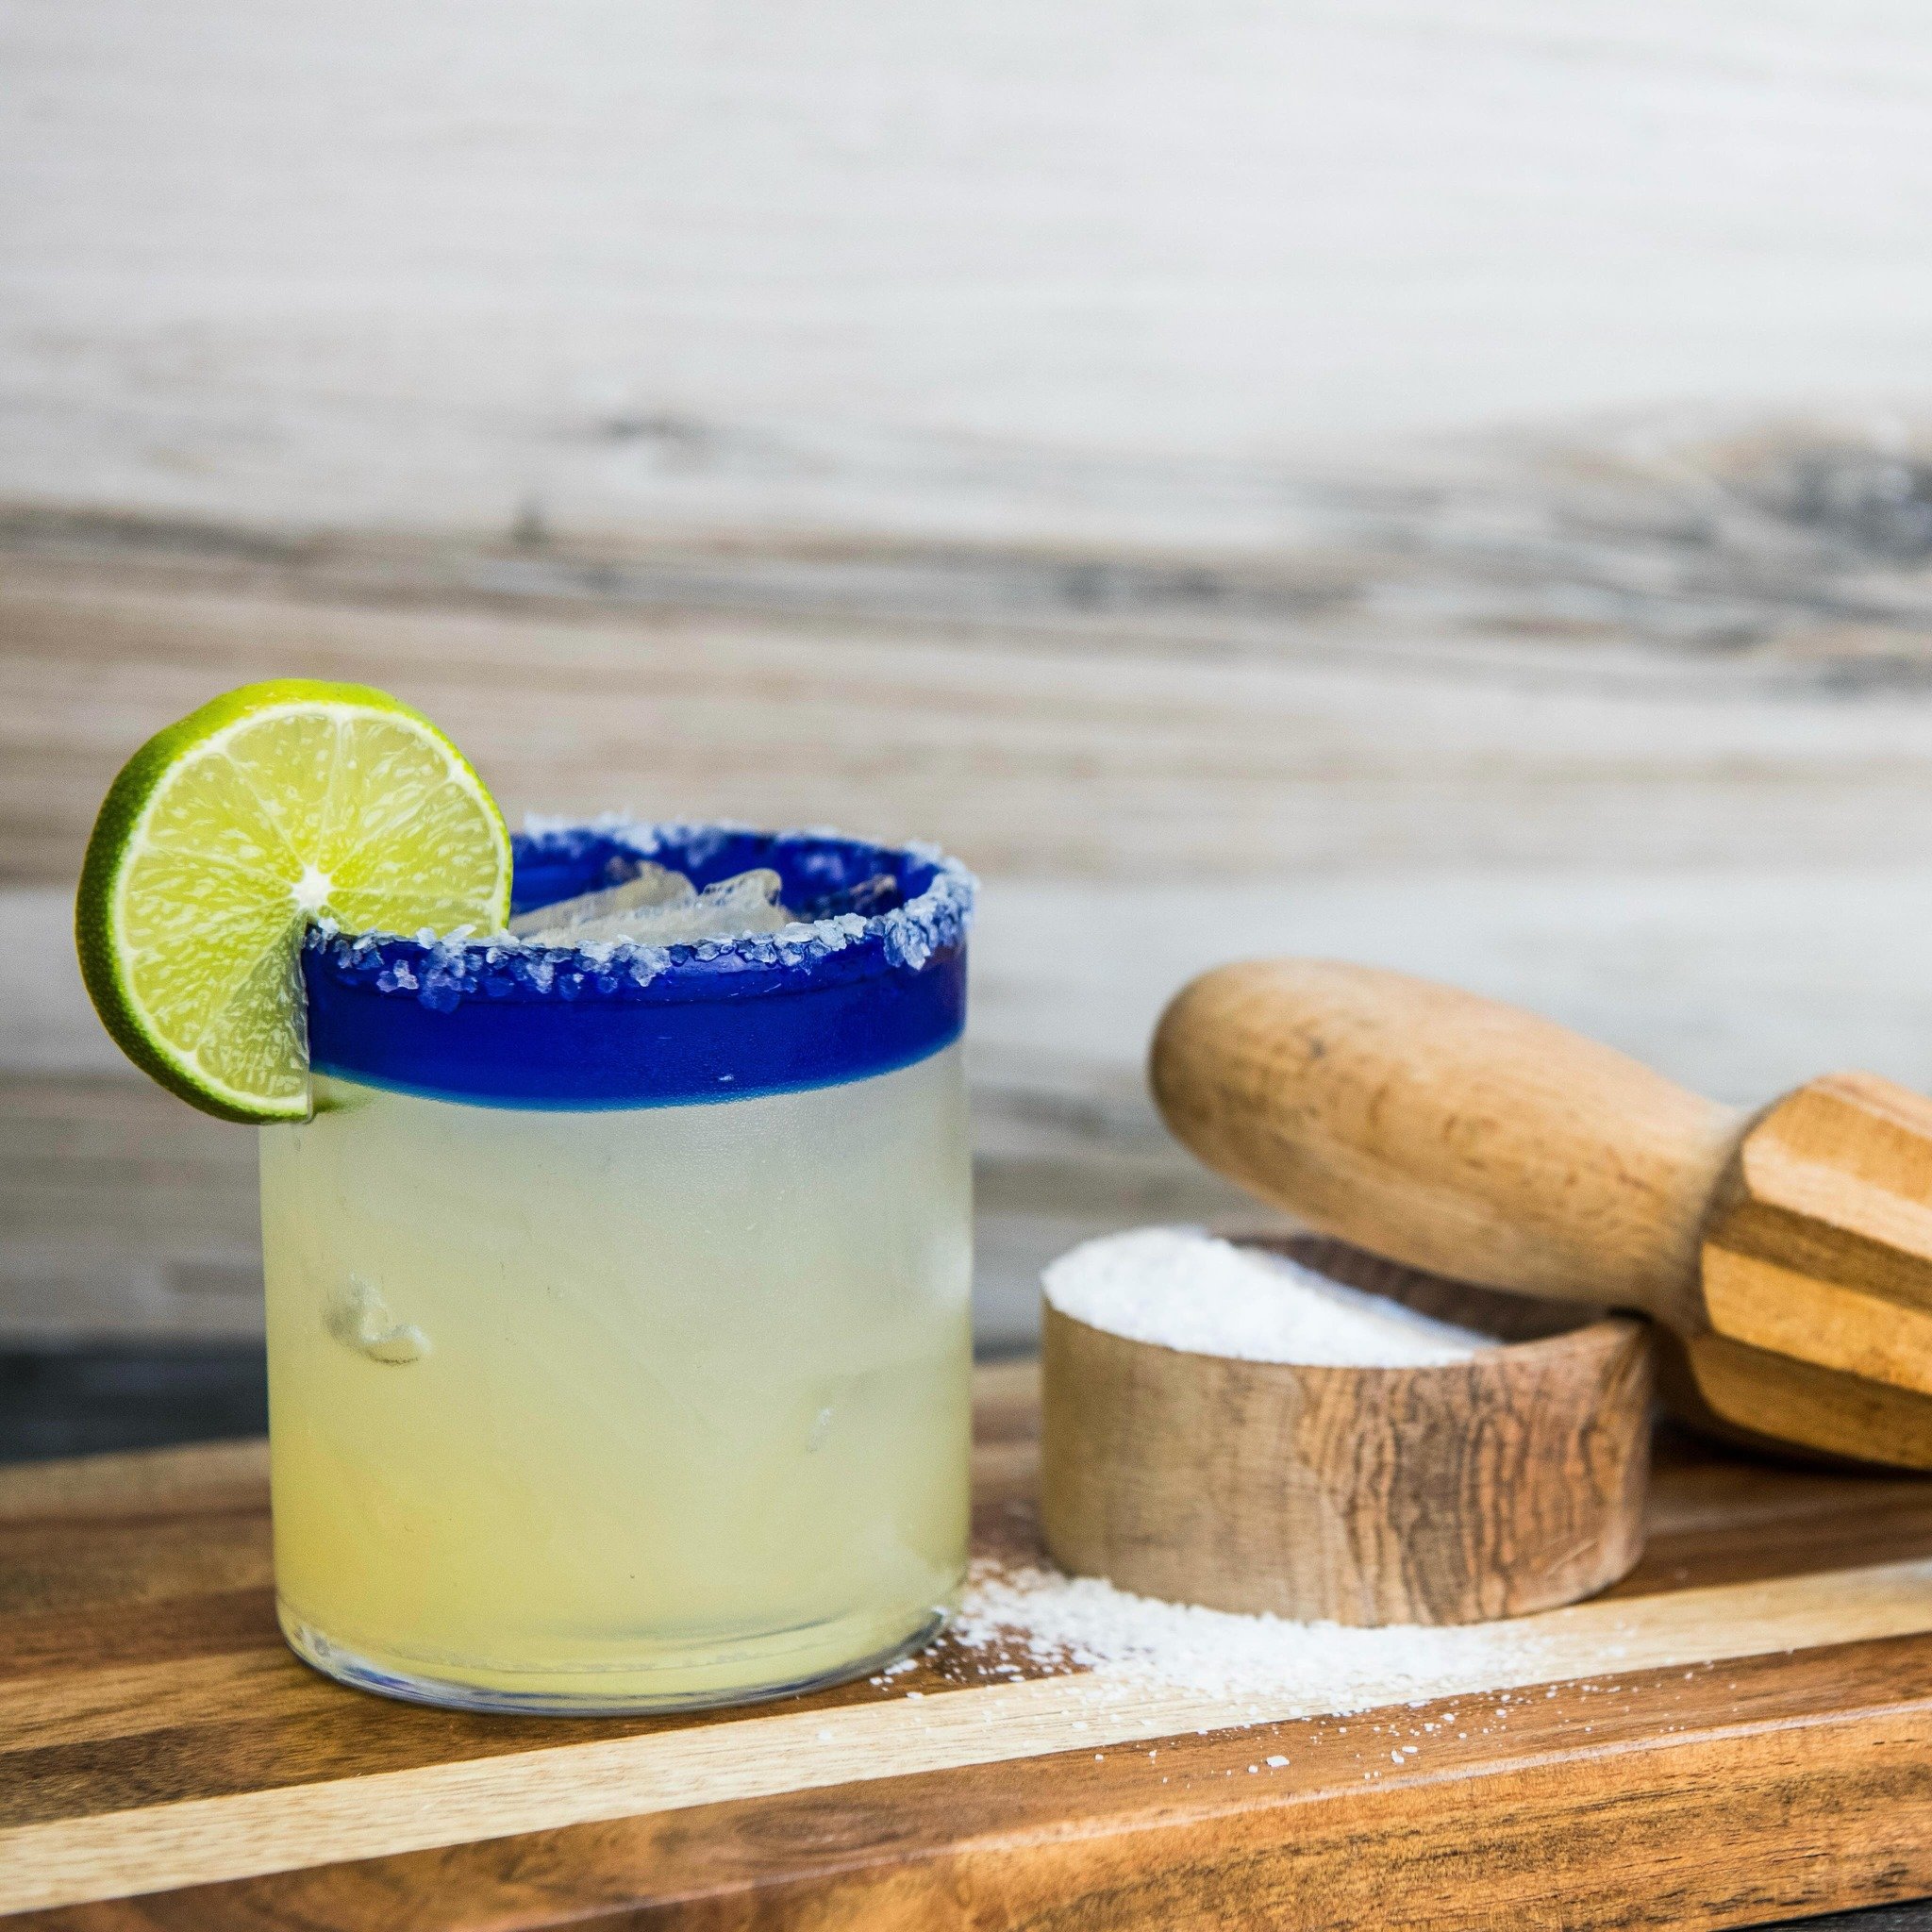 Simple, refreshing, and always in style. The Classico margarita never disappoints. Cheers to the timeless charm of a classic margarita! To find your nearest location, visit us online at https://www.Moctezumas.com/.